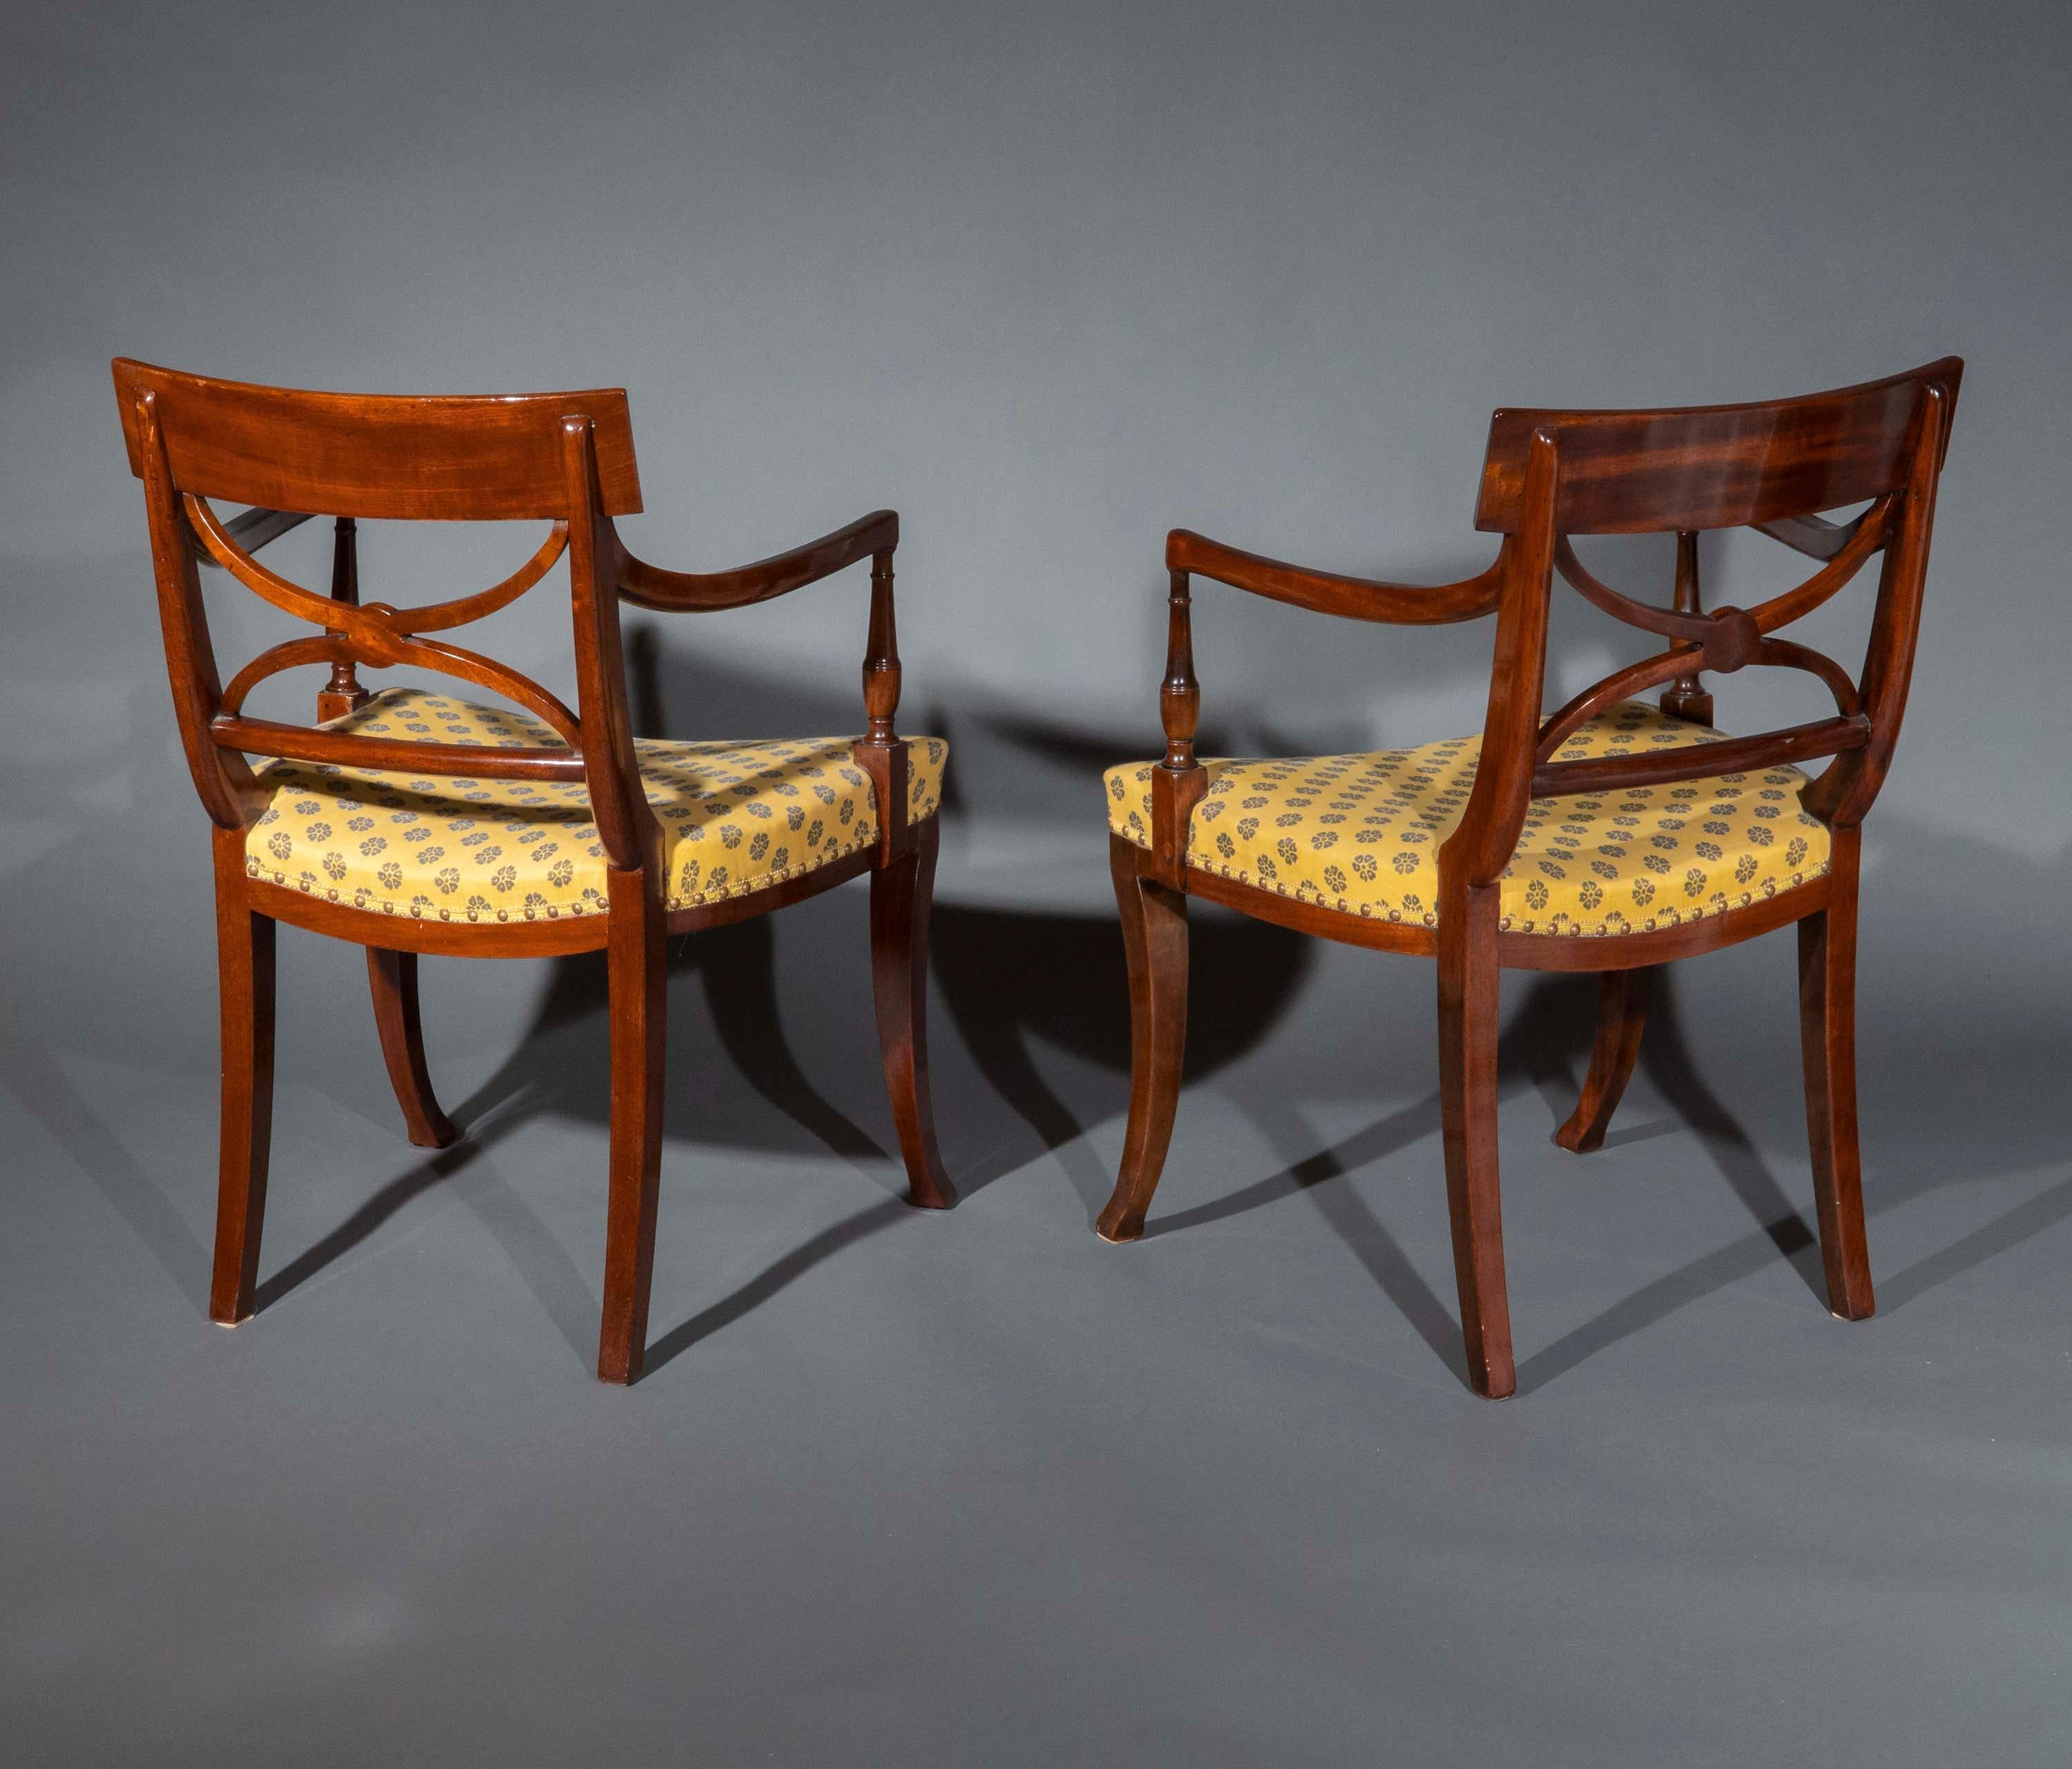 Pair of Regency Klismos Chairs, attributed to Gillows, early 19th century For Sale 1